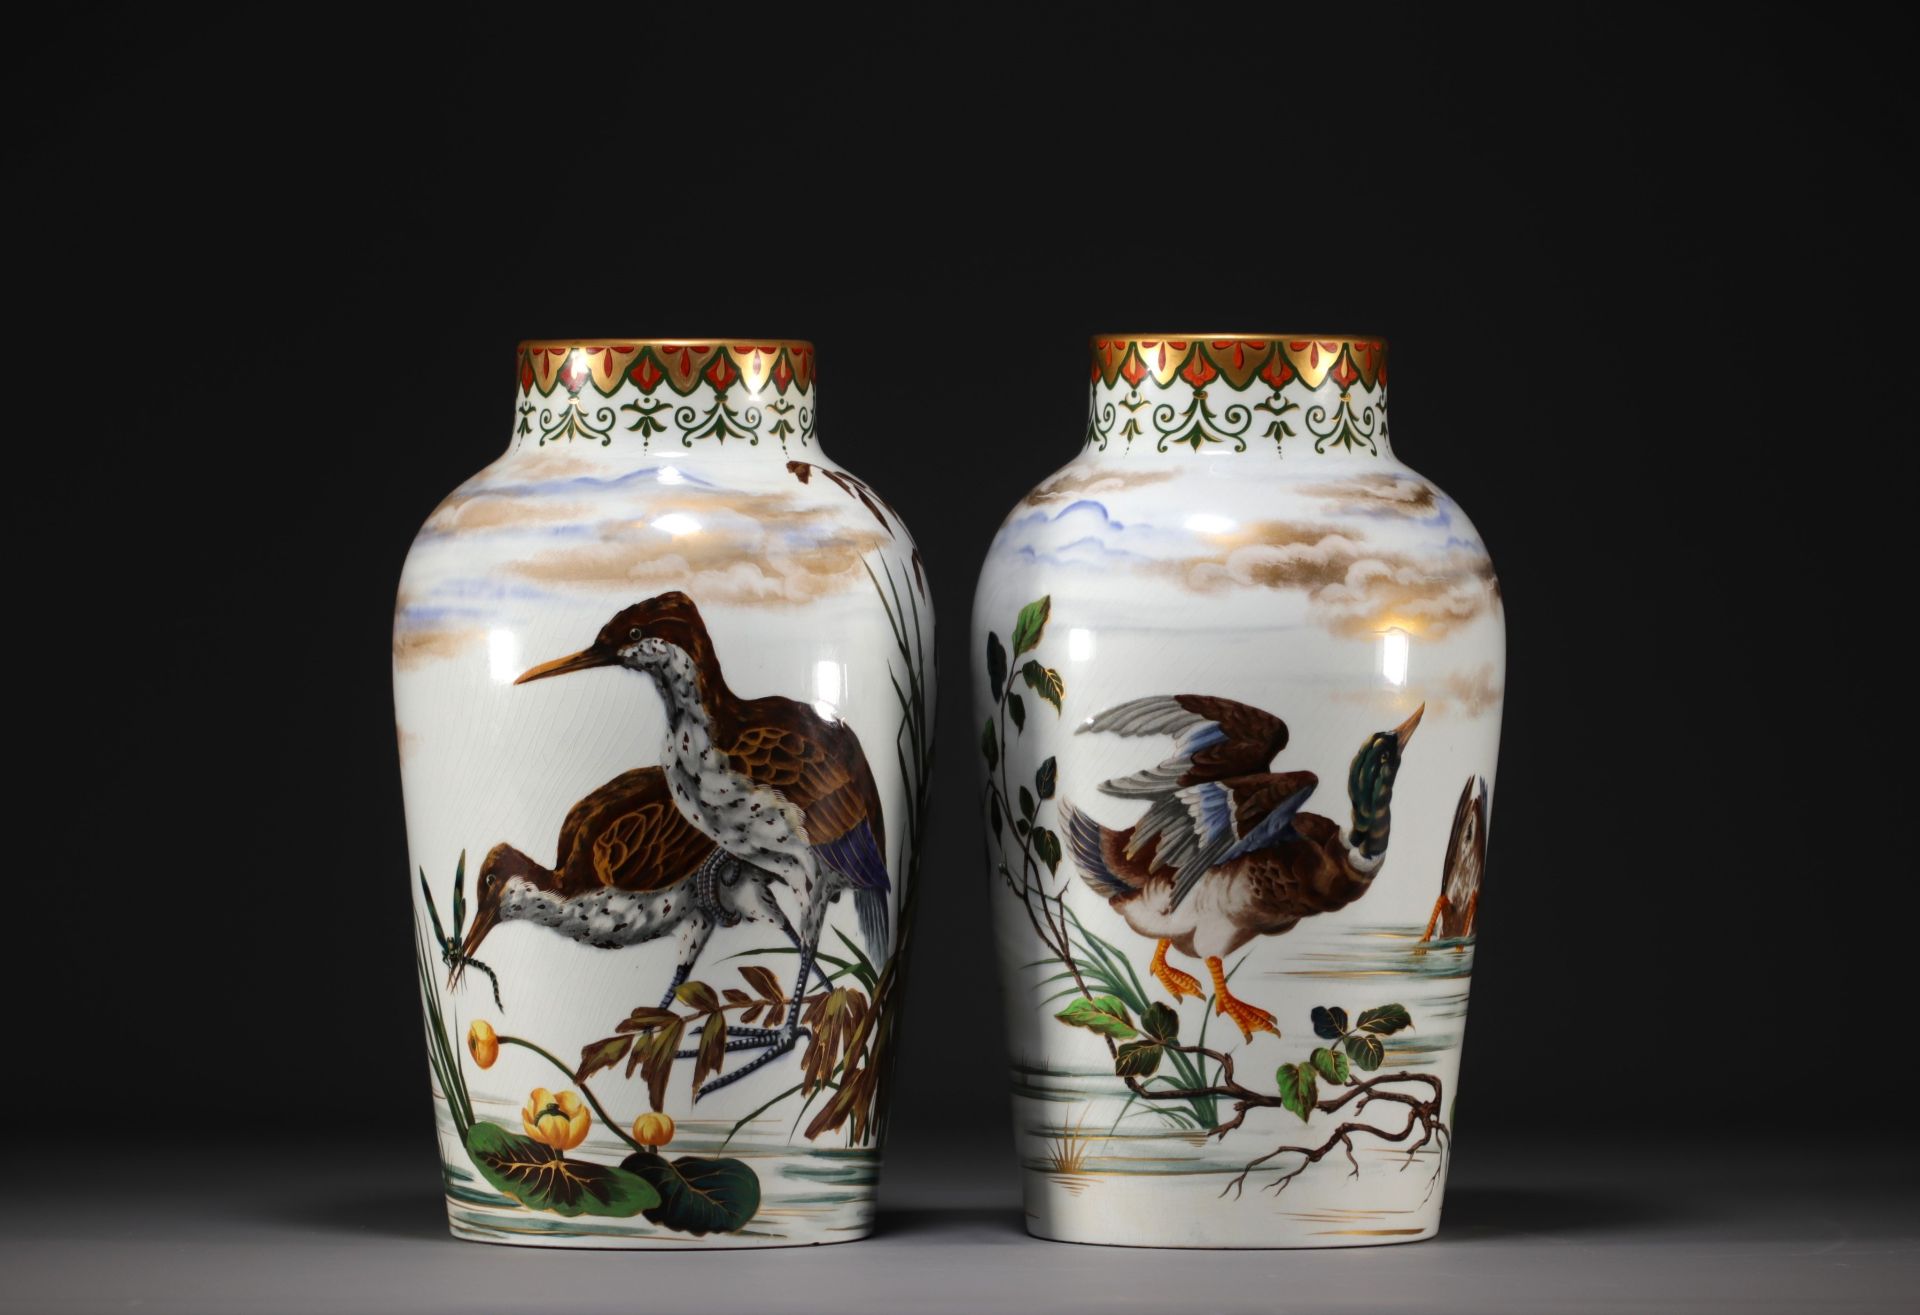 Taxile DOAT (1851-1938) - Pair of Japanese porcelain vases decorated with birds, circa 1900.